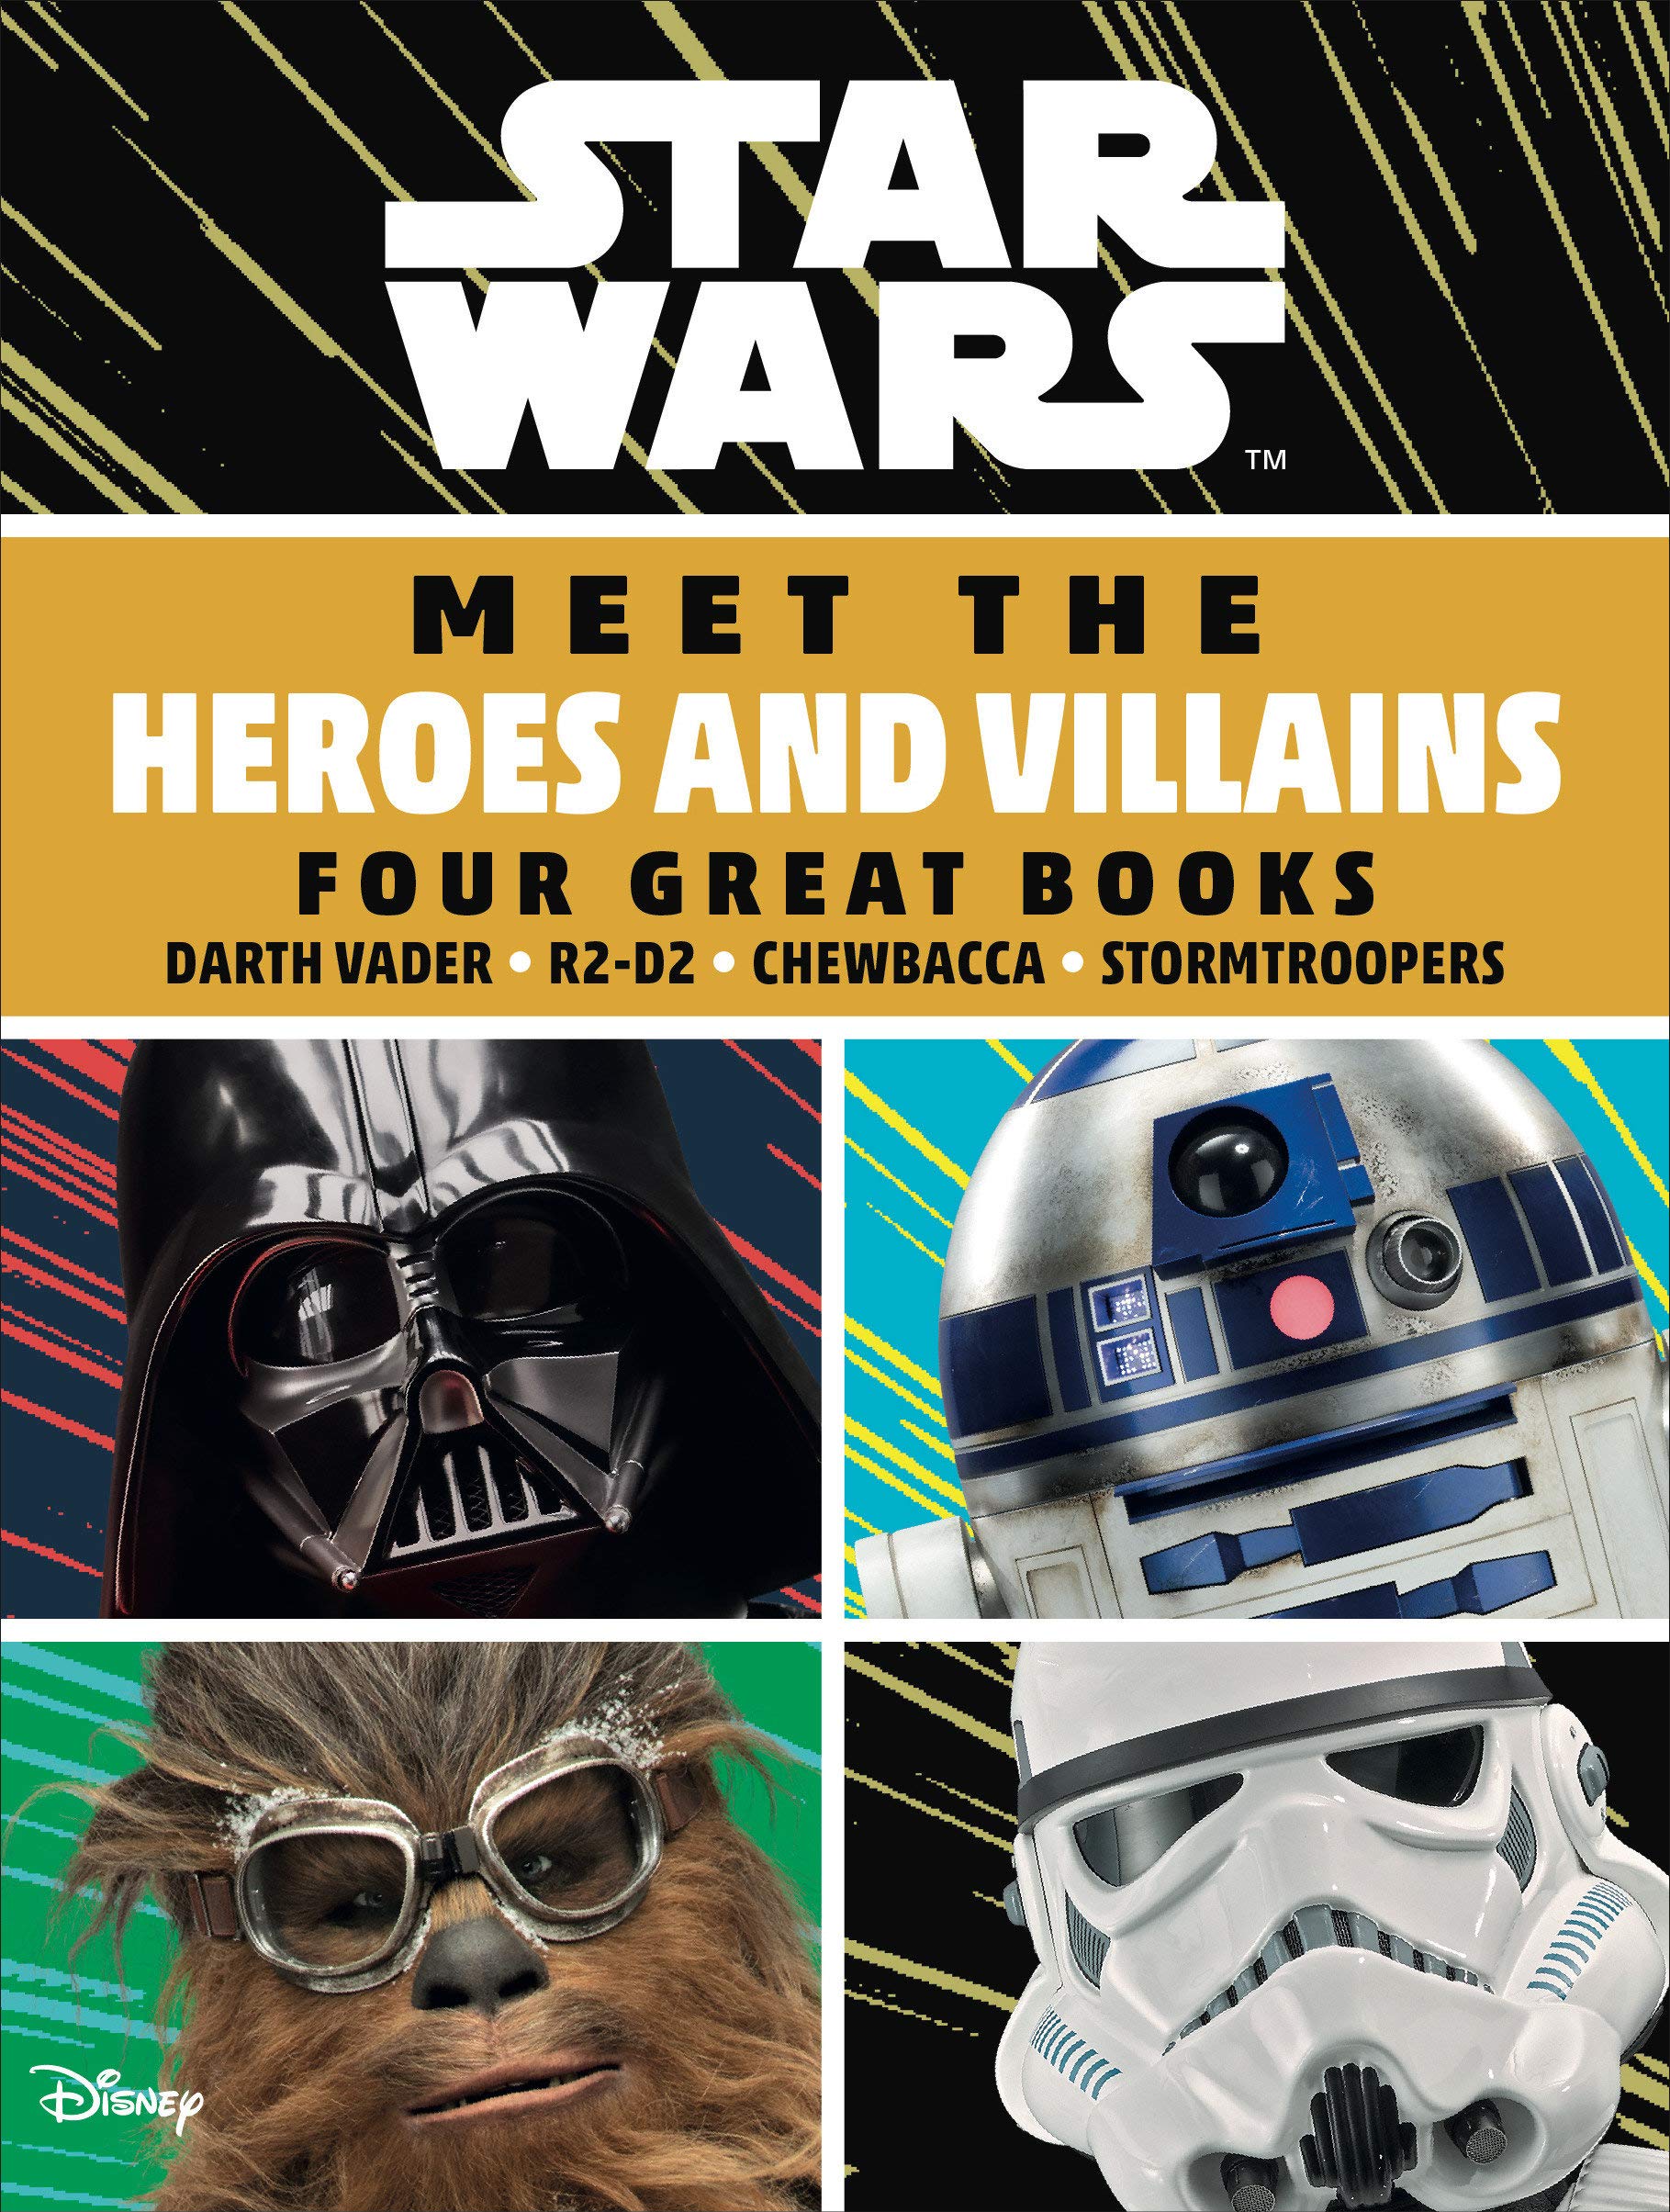 Star Wars Meet the Heroes and Villains Box Set: Four Great Books Hardcover by Emma Grange (Author), Ruth Amos (Author)